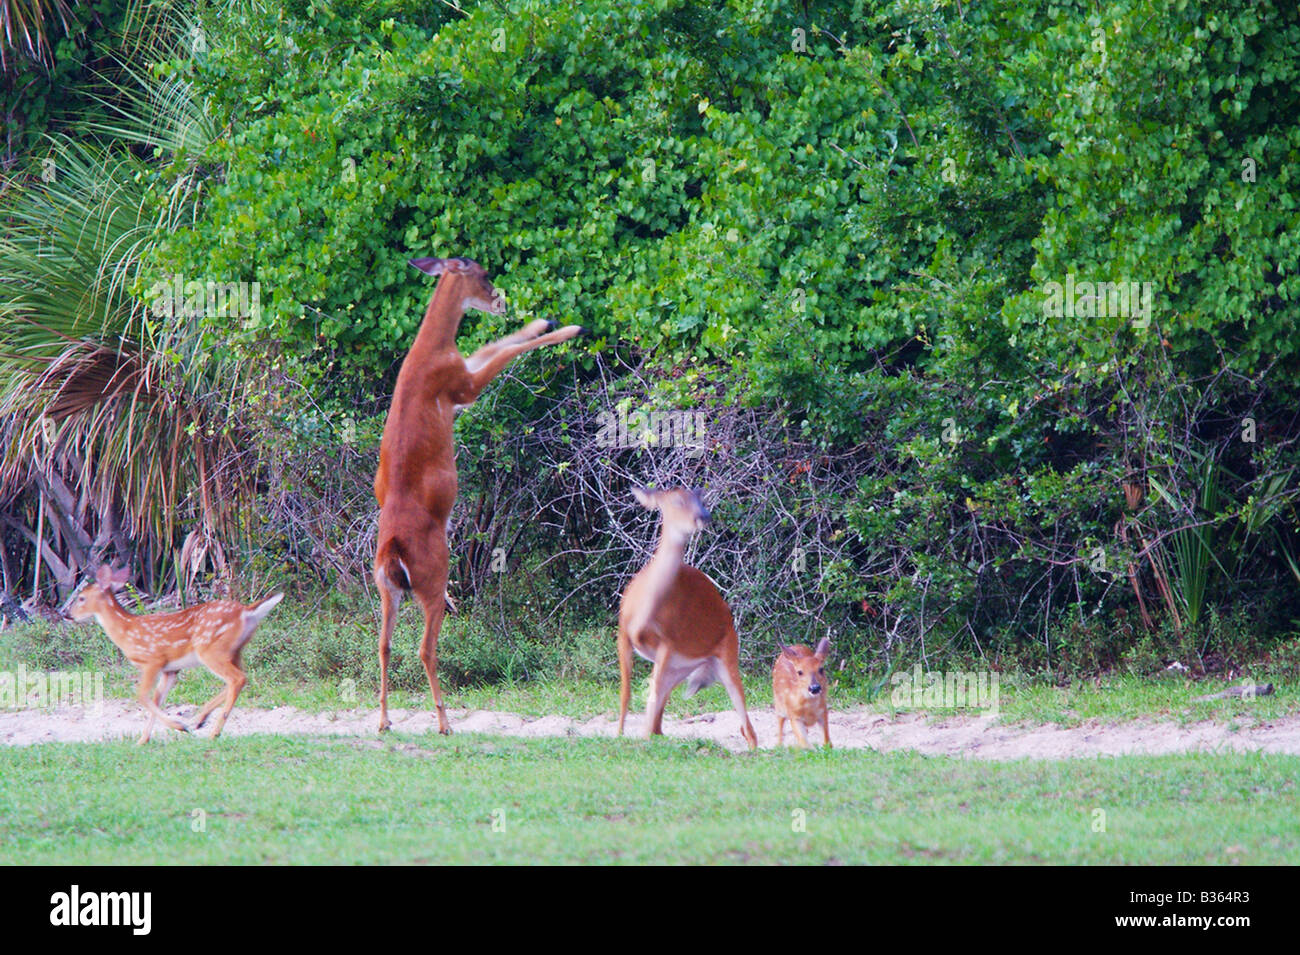 A white-tailed deer raises up on it's hind legs with three other deer in the picture. Stock Photo